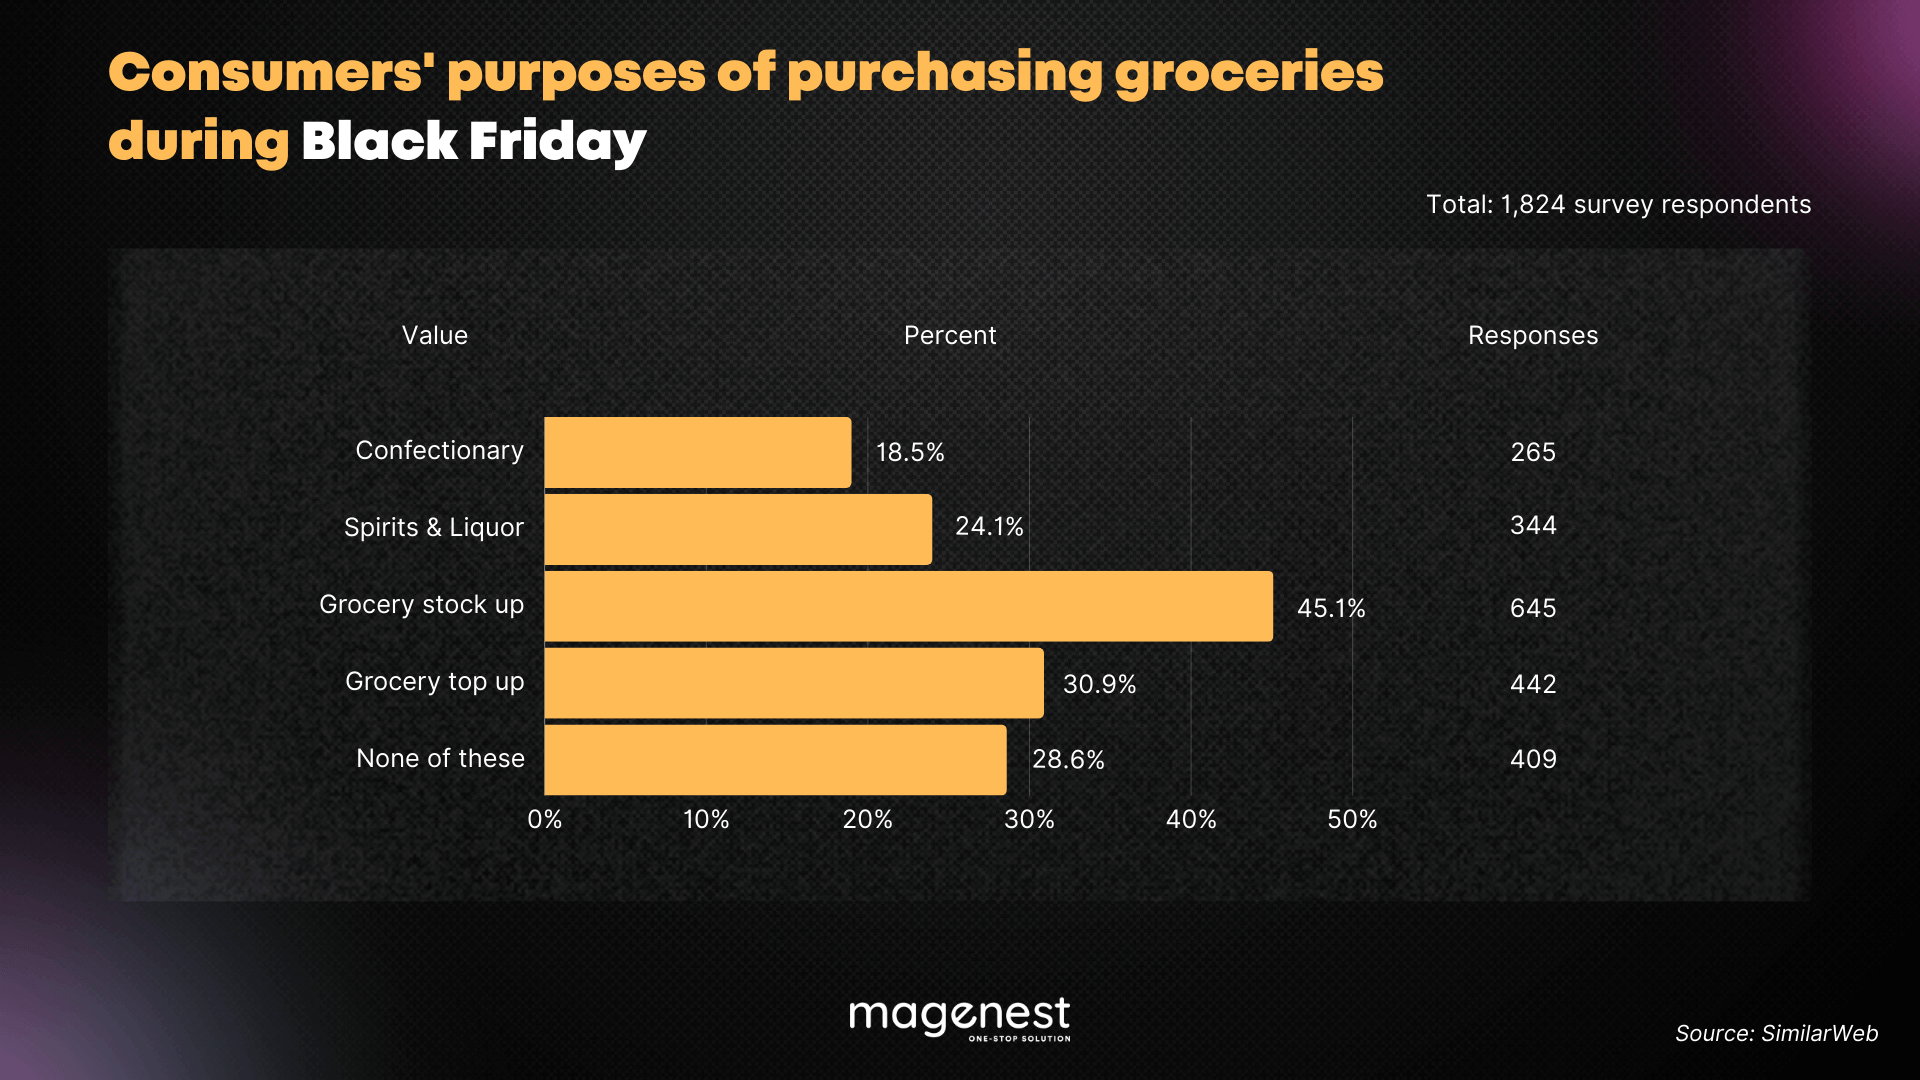 Consumers' purposes of purchasing groceries during Black Friday